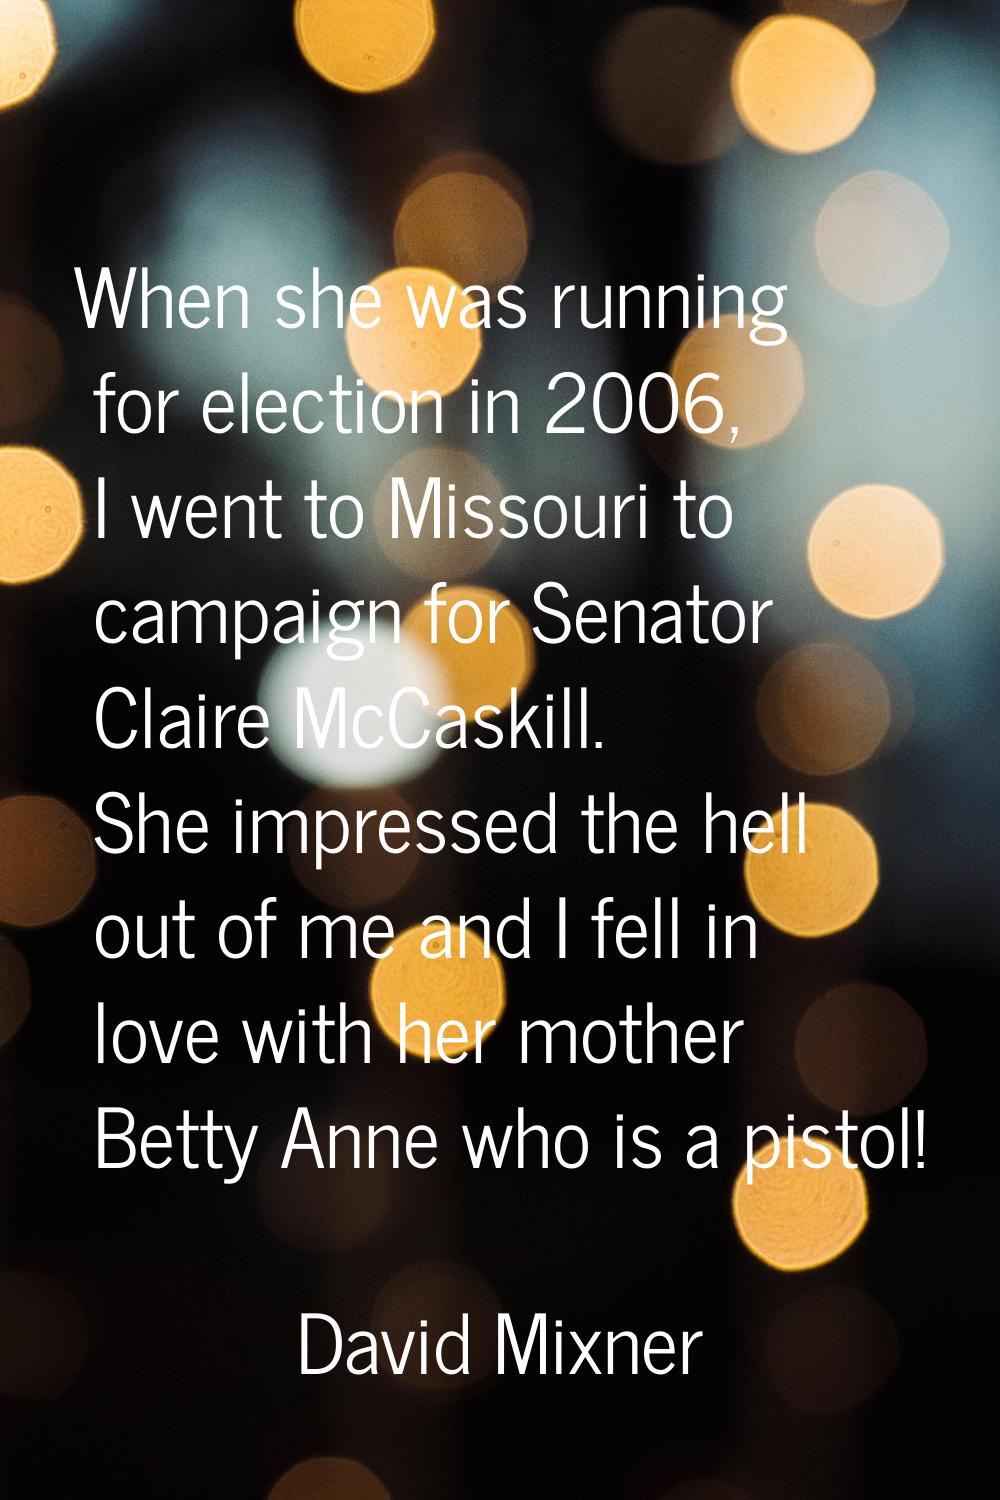 When she was running for election in 2006, I went to Missouri to campaign for Senator Claire McCask